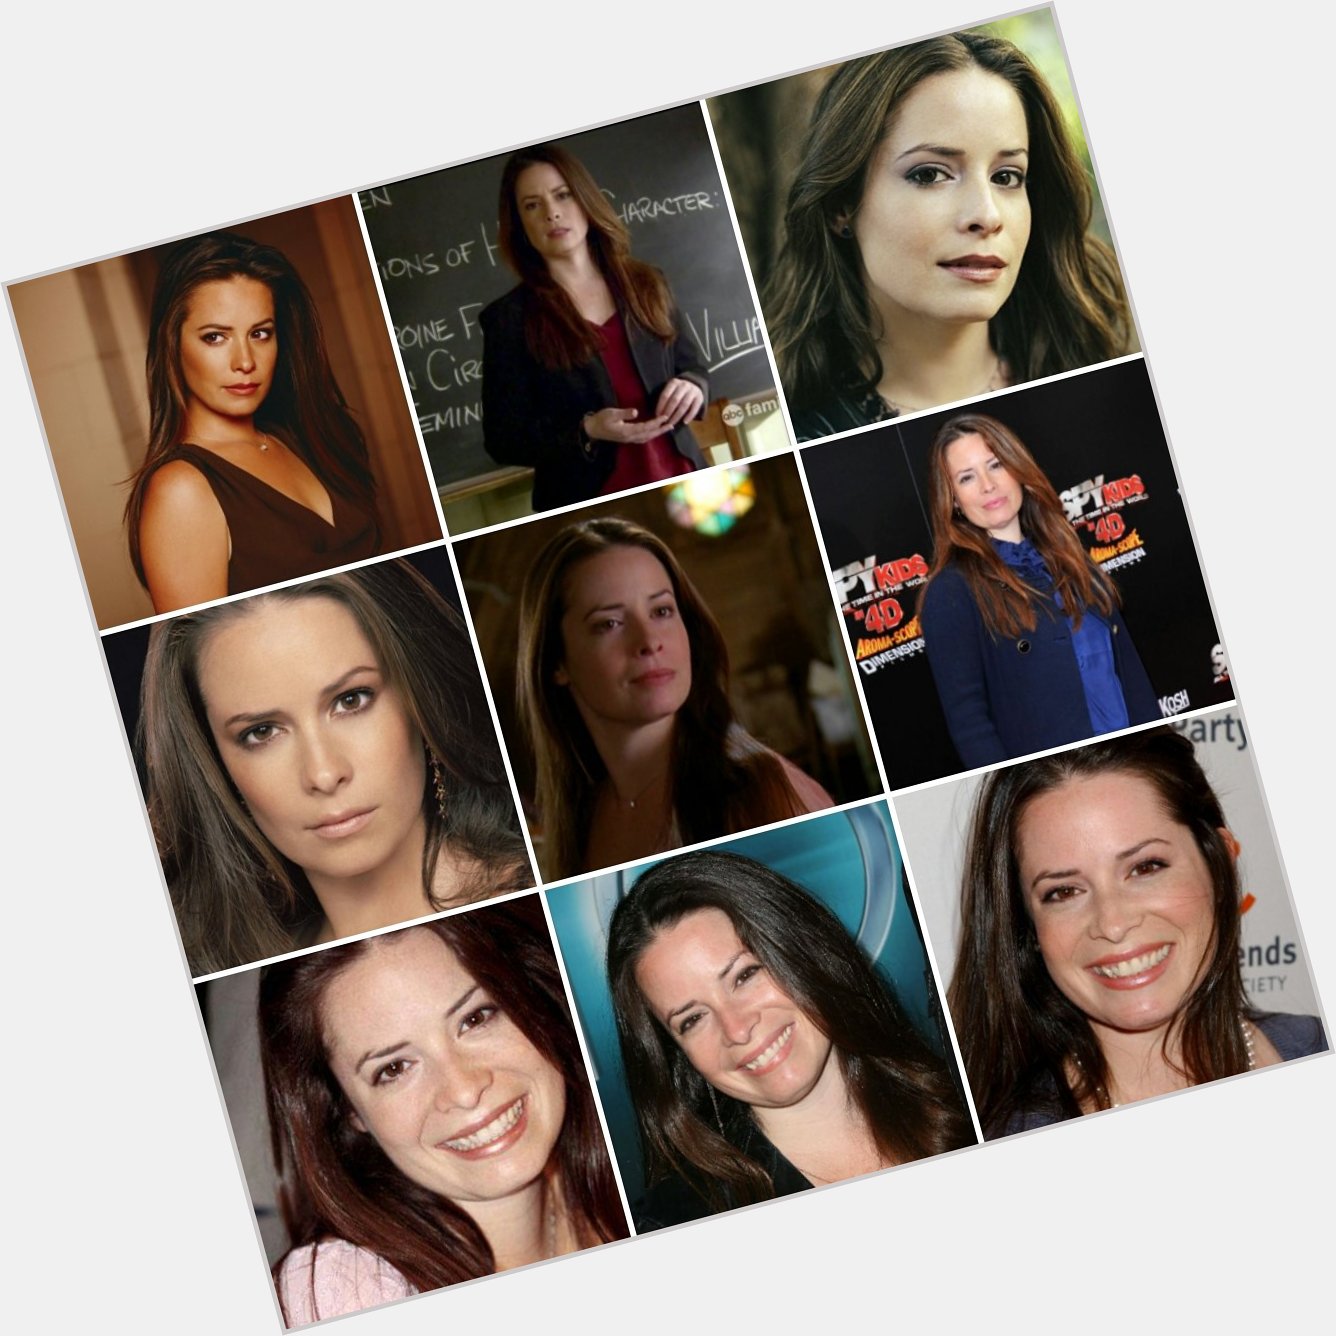 Happy Birthday Holly Marie Combs!!  I hope you have a wonderful birthday 